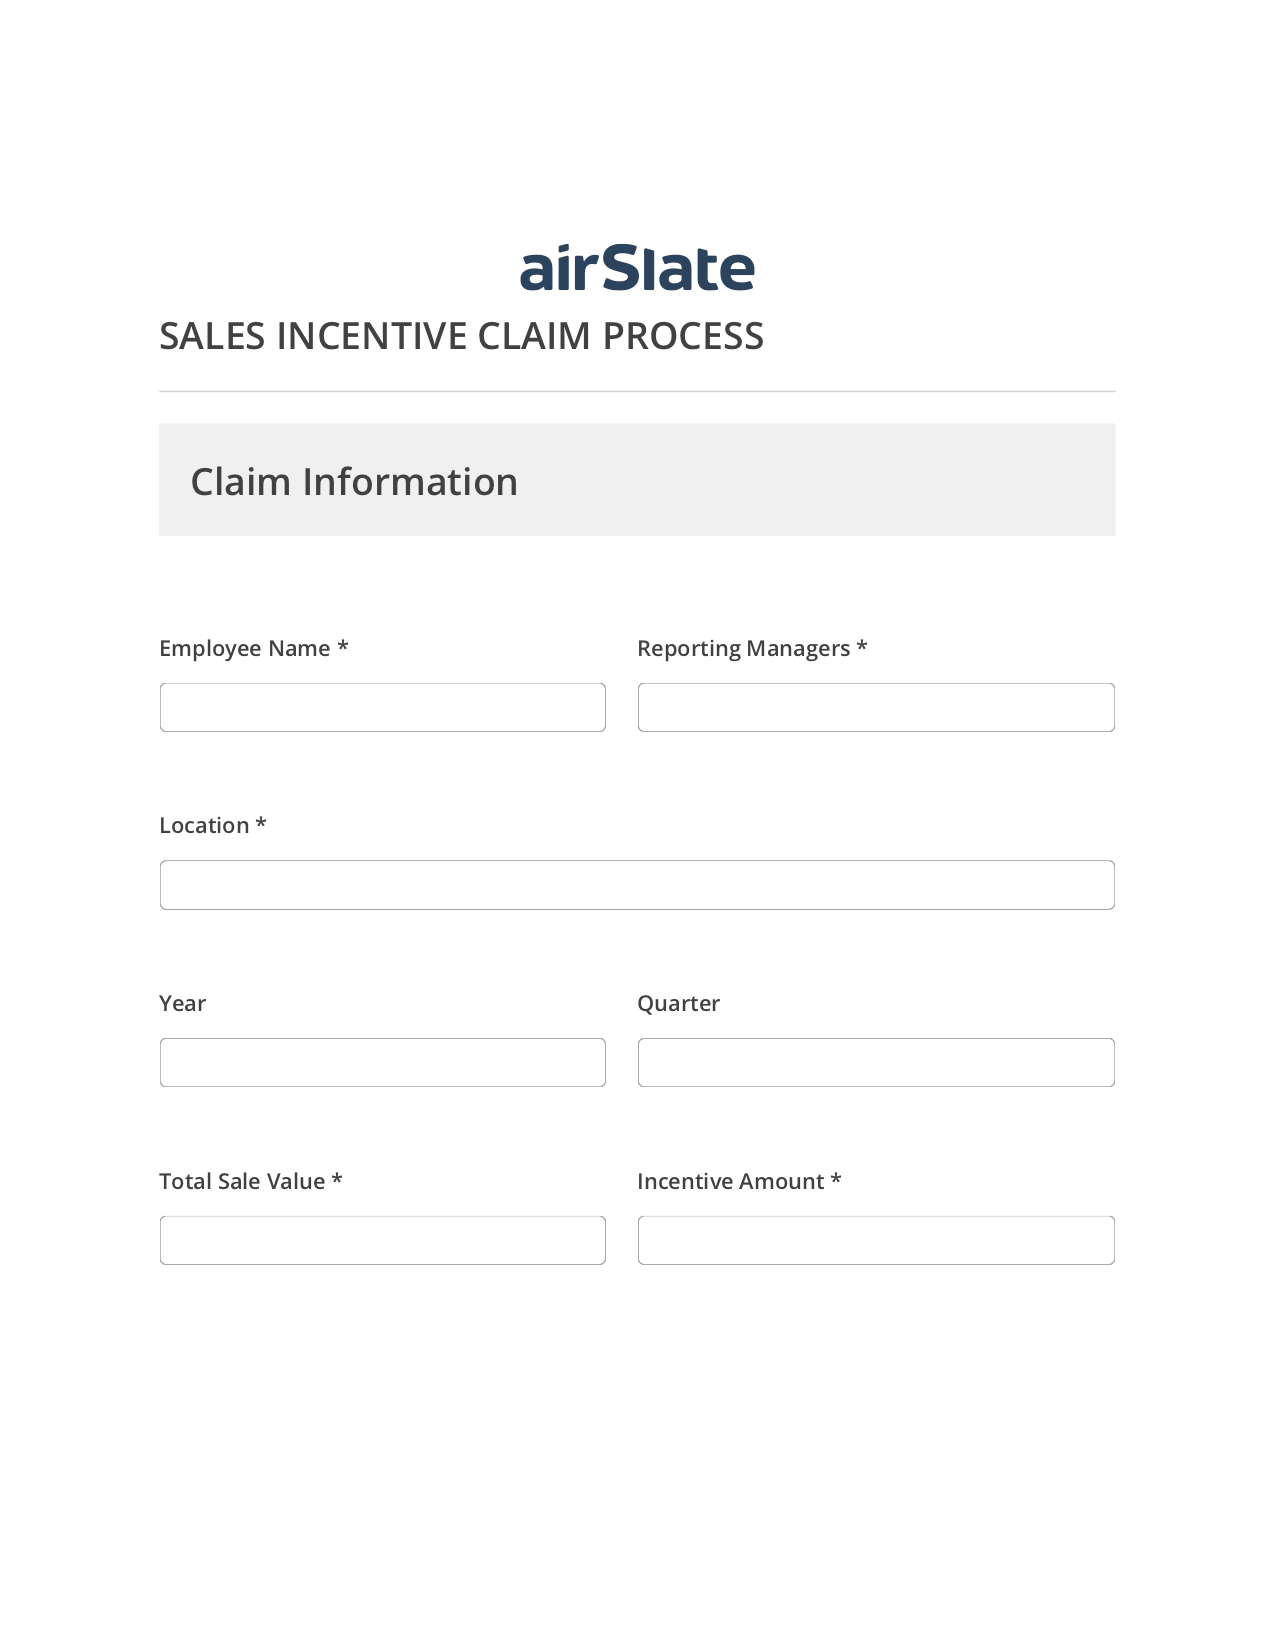 Sales Incentive Claim Process Flow Pre-fill from Excel Spreadsheet Dropdown Options Bot